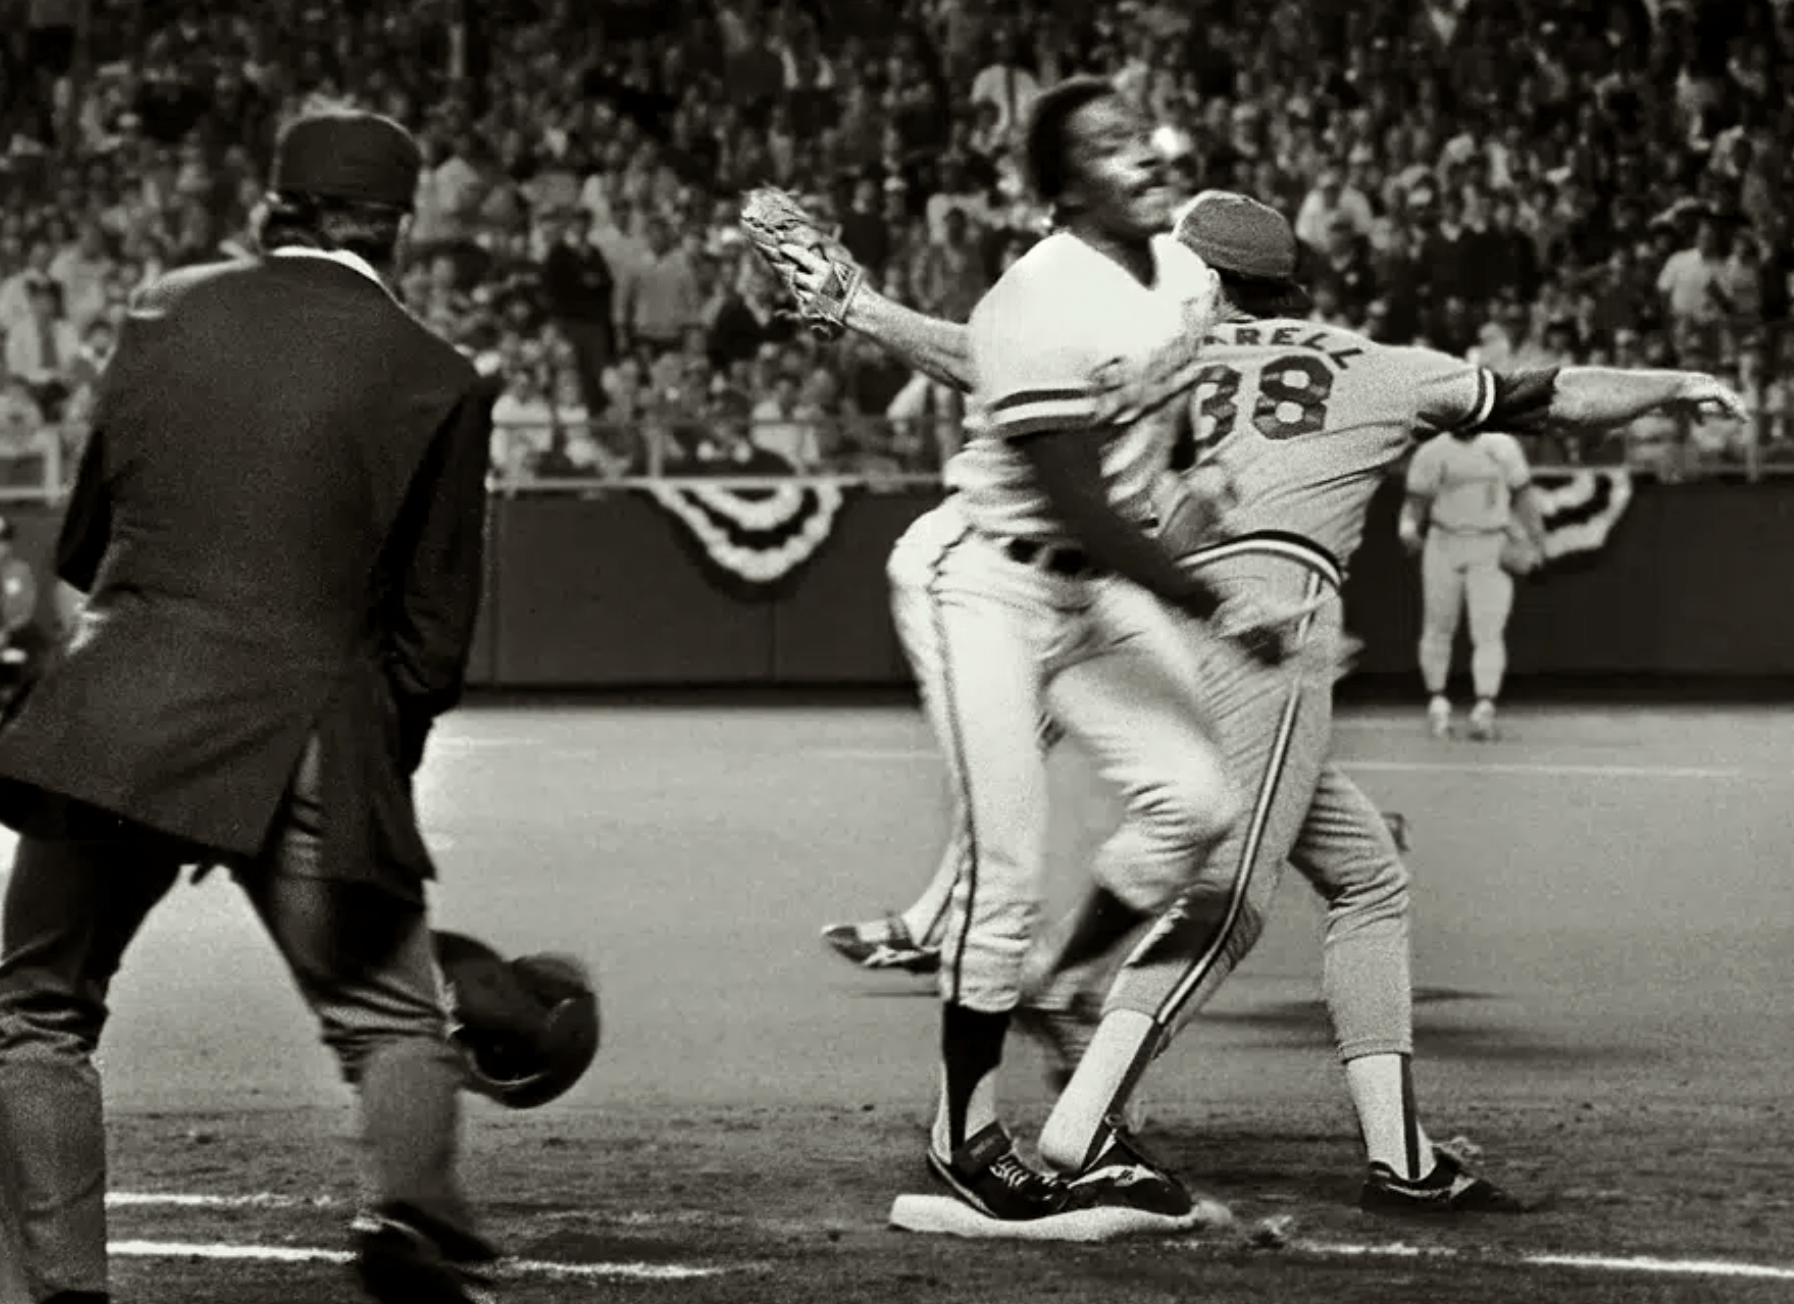 Umpire Don Denkinger, left, watches as St. Cardinals pitcher Todd Worrell, right, stretches to catch the ball as Kansas City Royals batter Jorge Orta steps on first base during the ninth inning in Game 6 of baseball's World Series in Kansas City, Mo., Oct. 26, 1985.